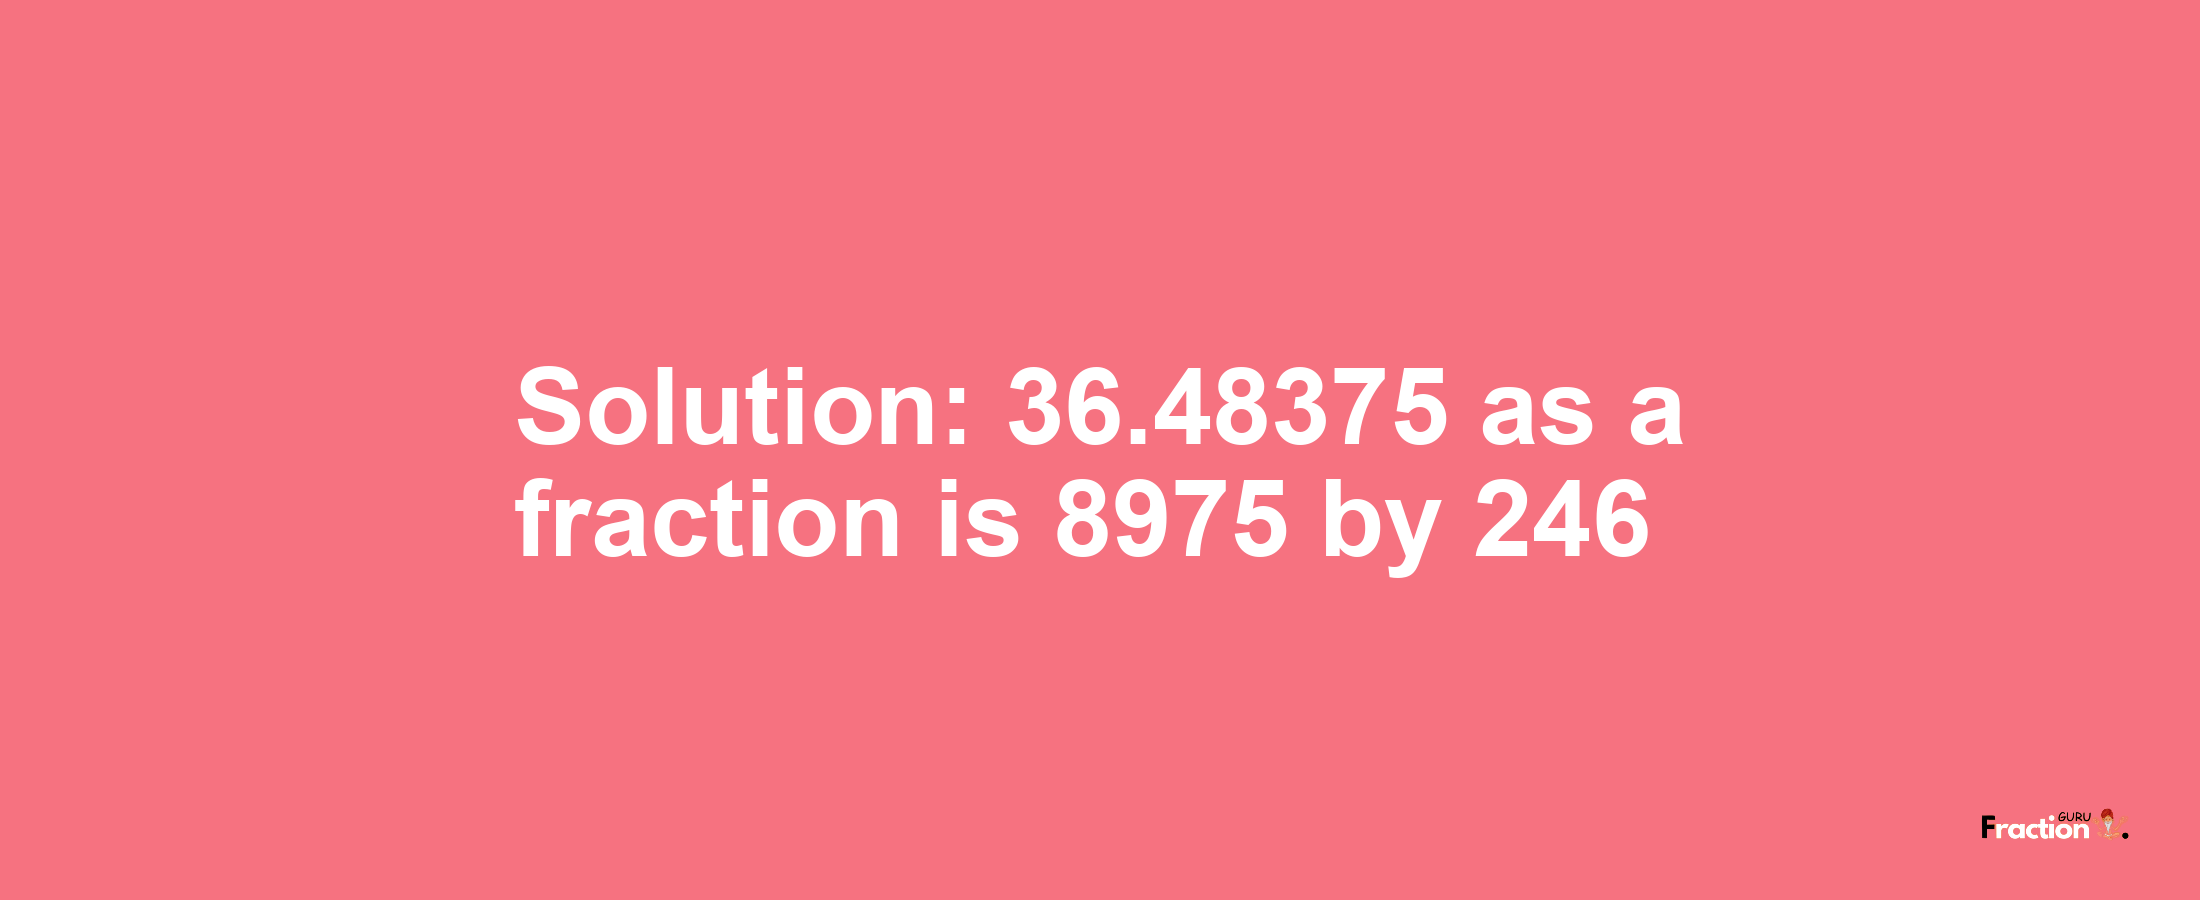 Solution:36.48375 as a fraction is 8975/246